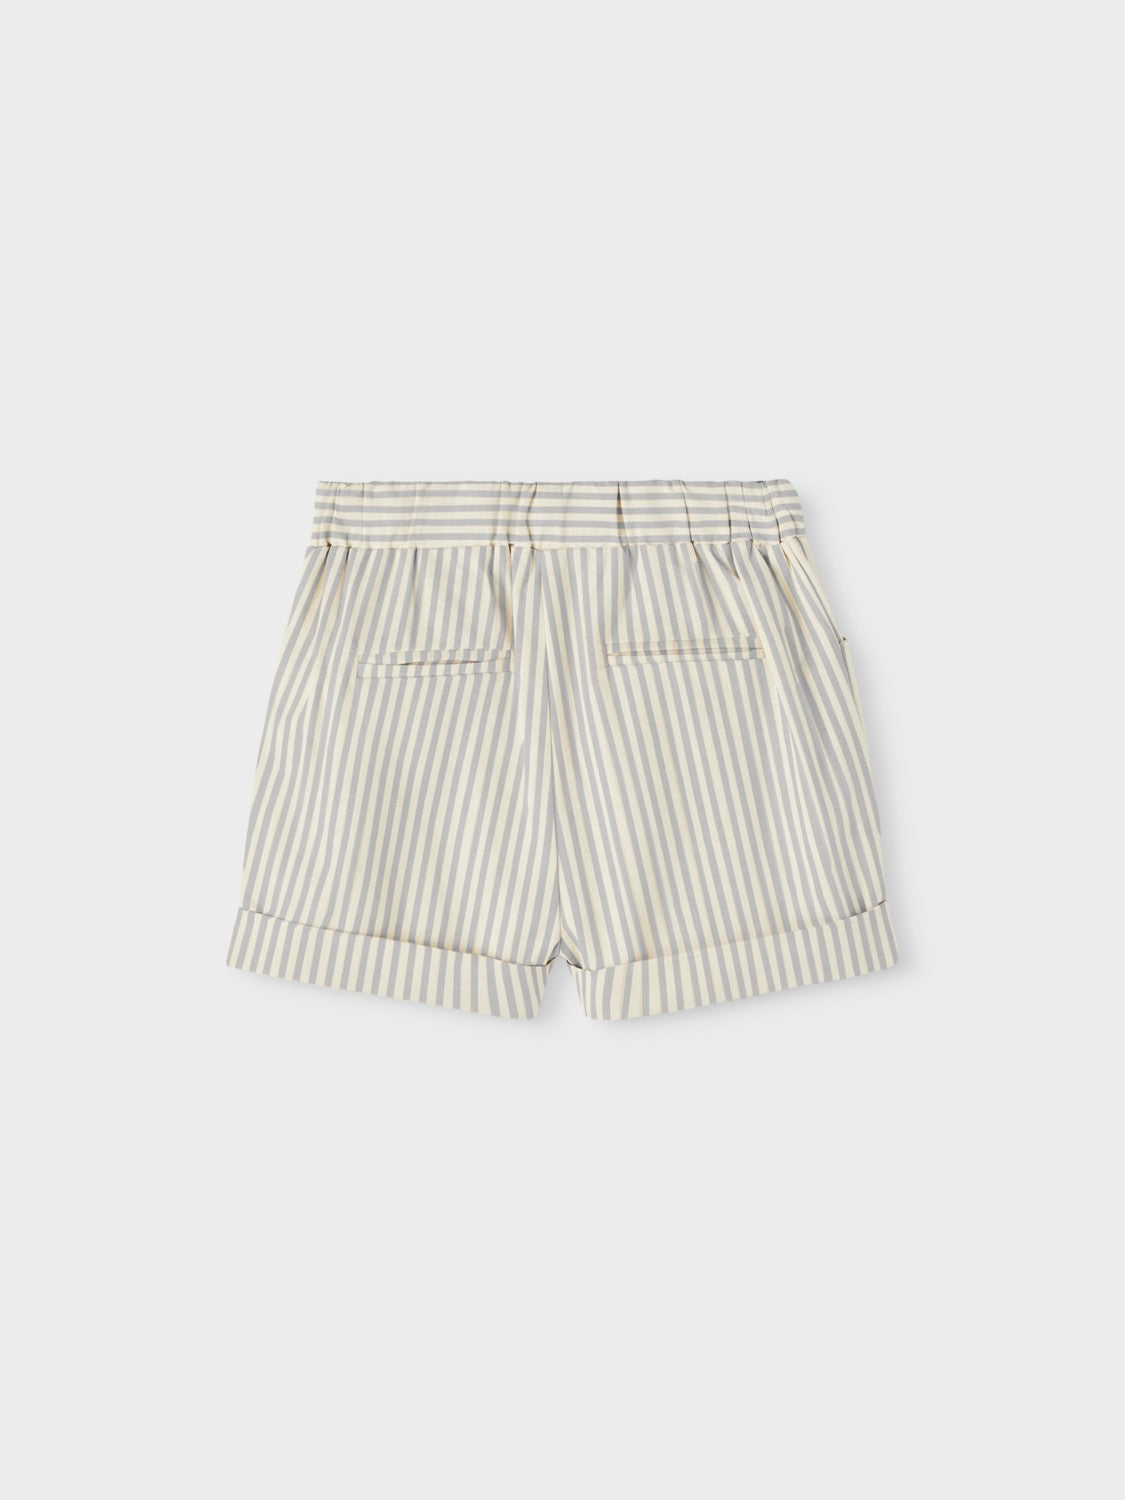 Lil Atelier Diogo Loose Shorts - Harbor Mist